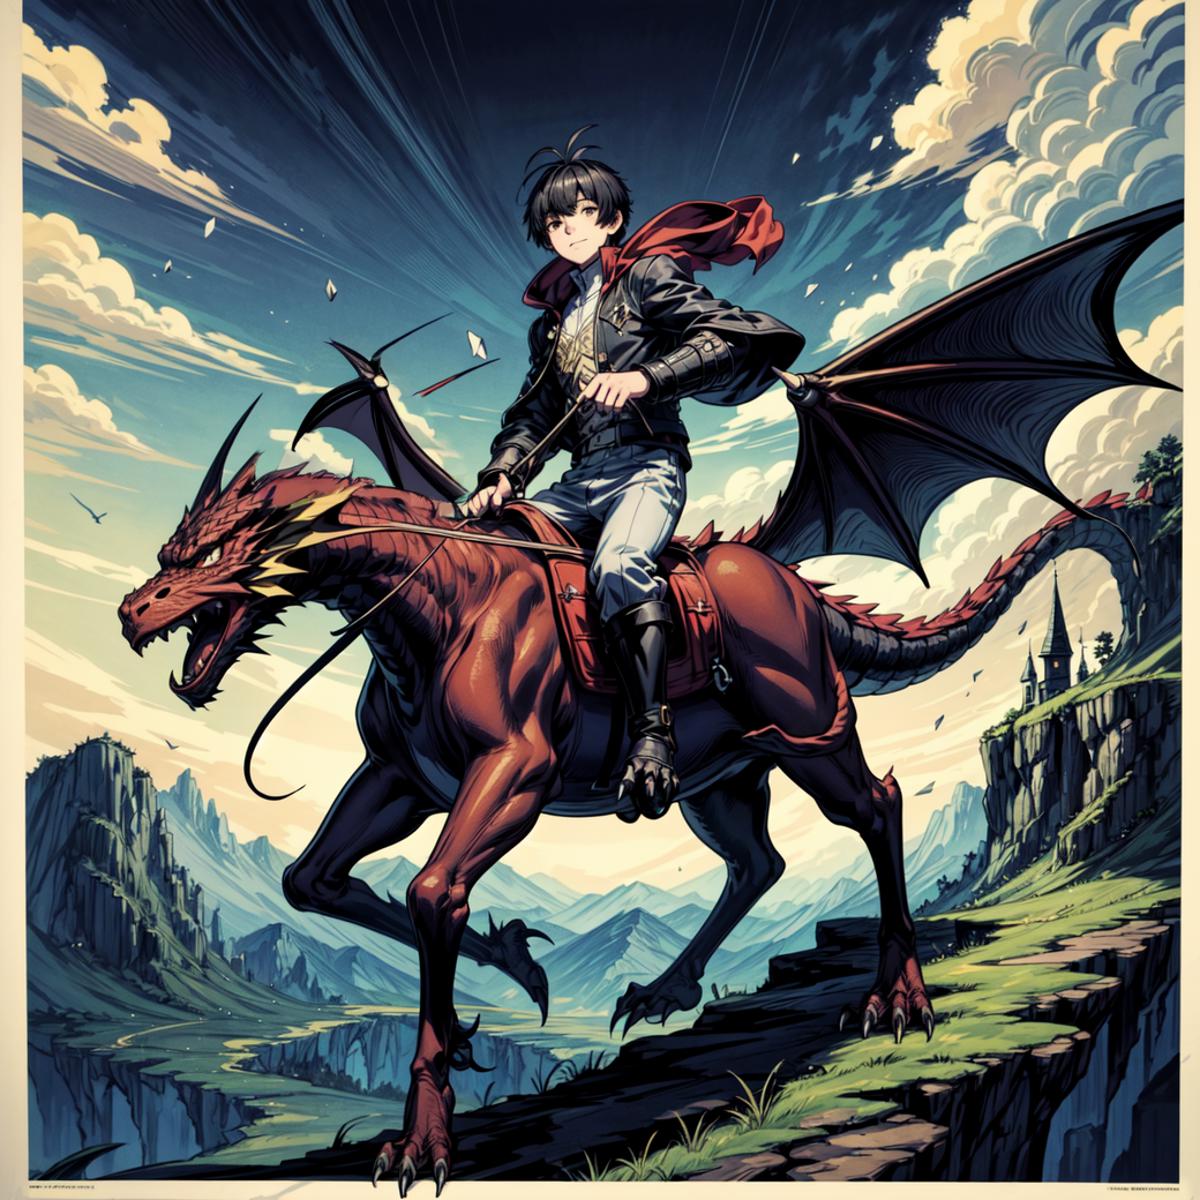 A person riding a dragon in a dark setting with clouds in the background.